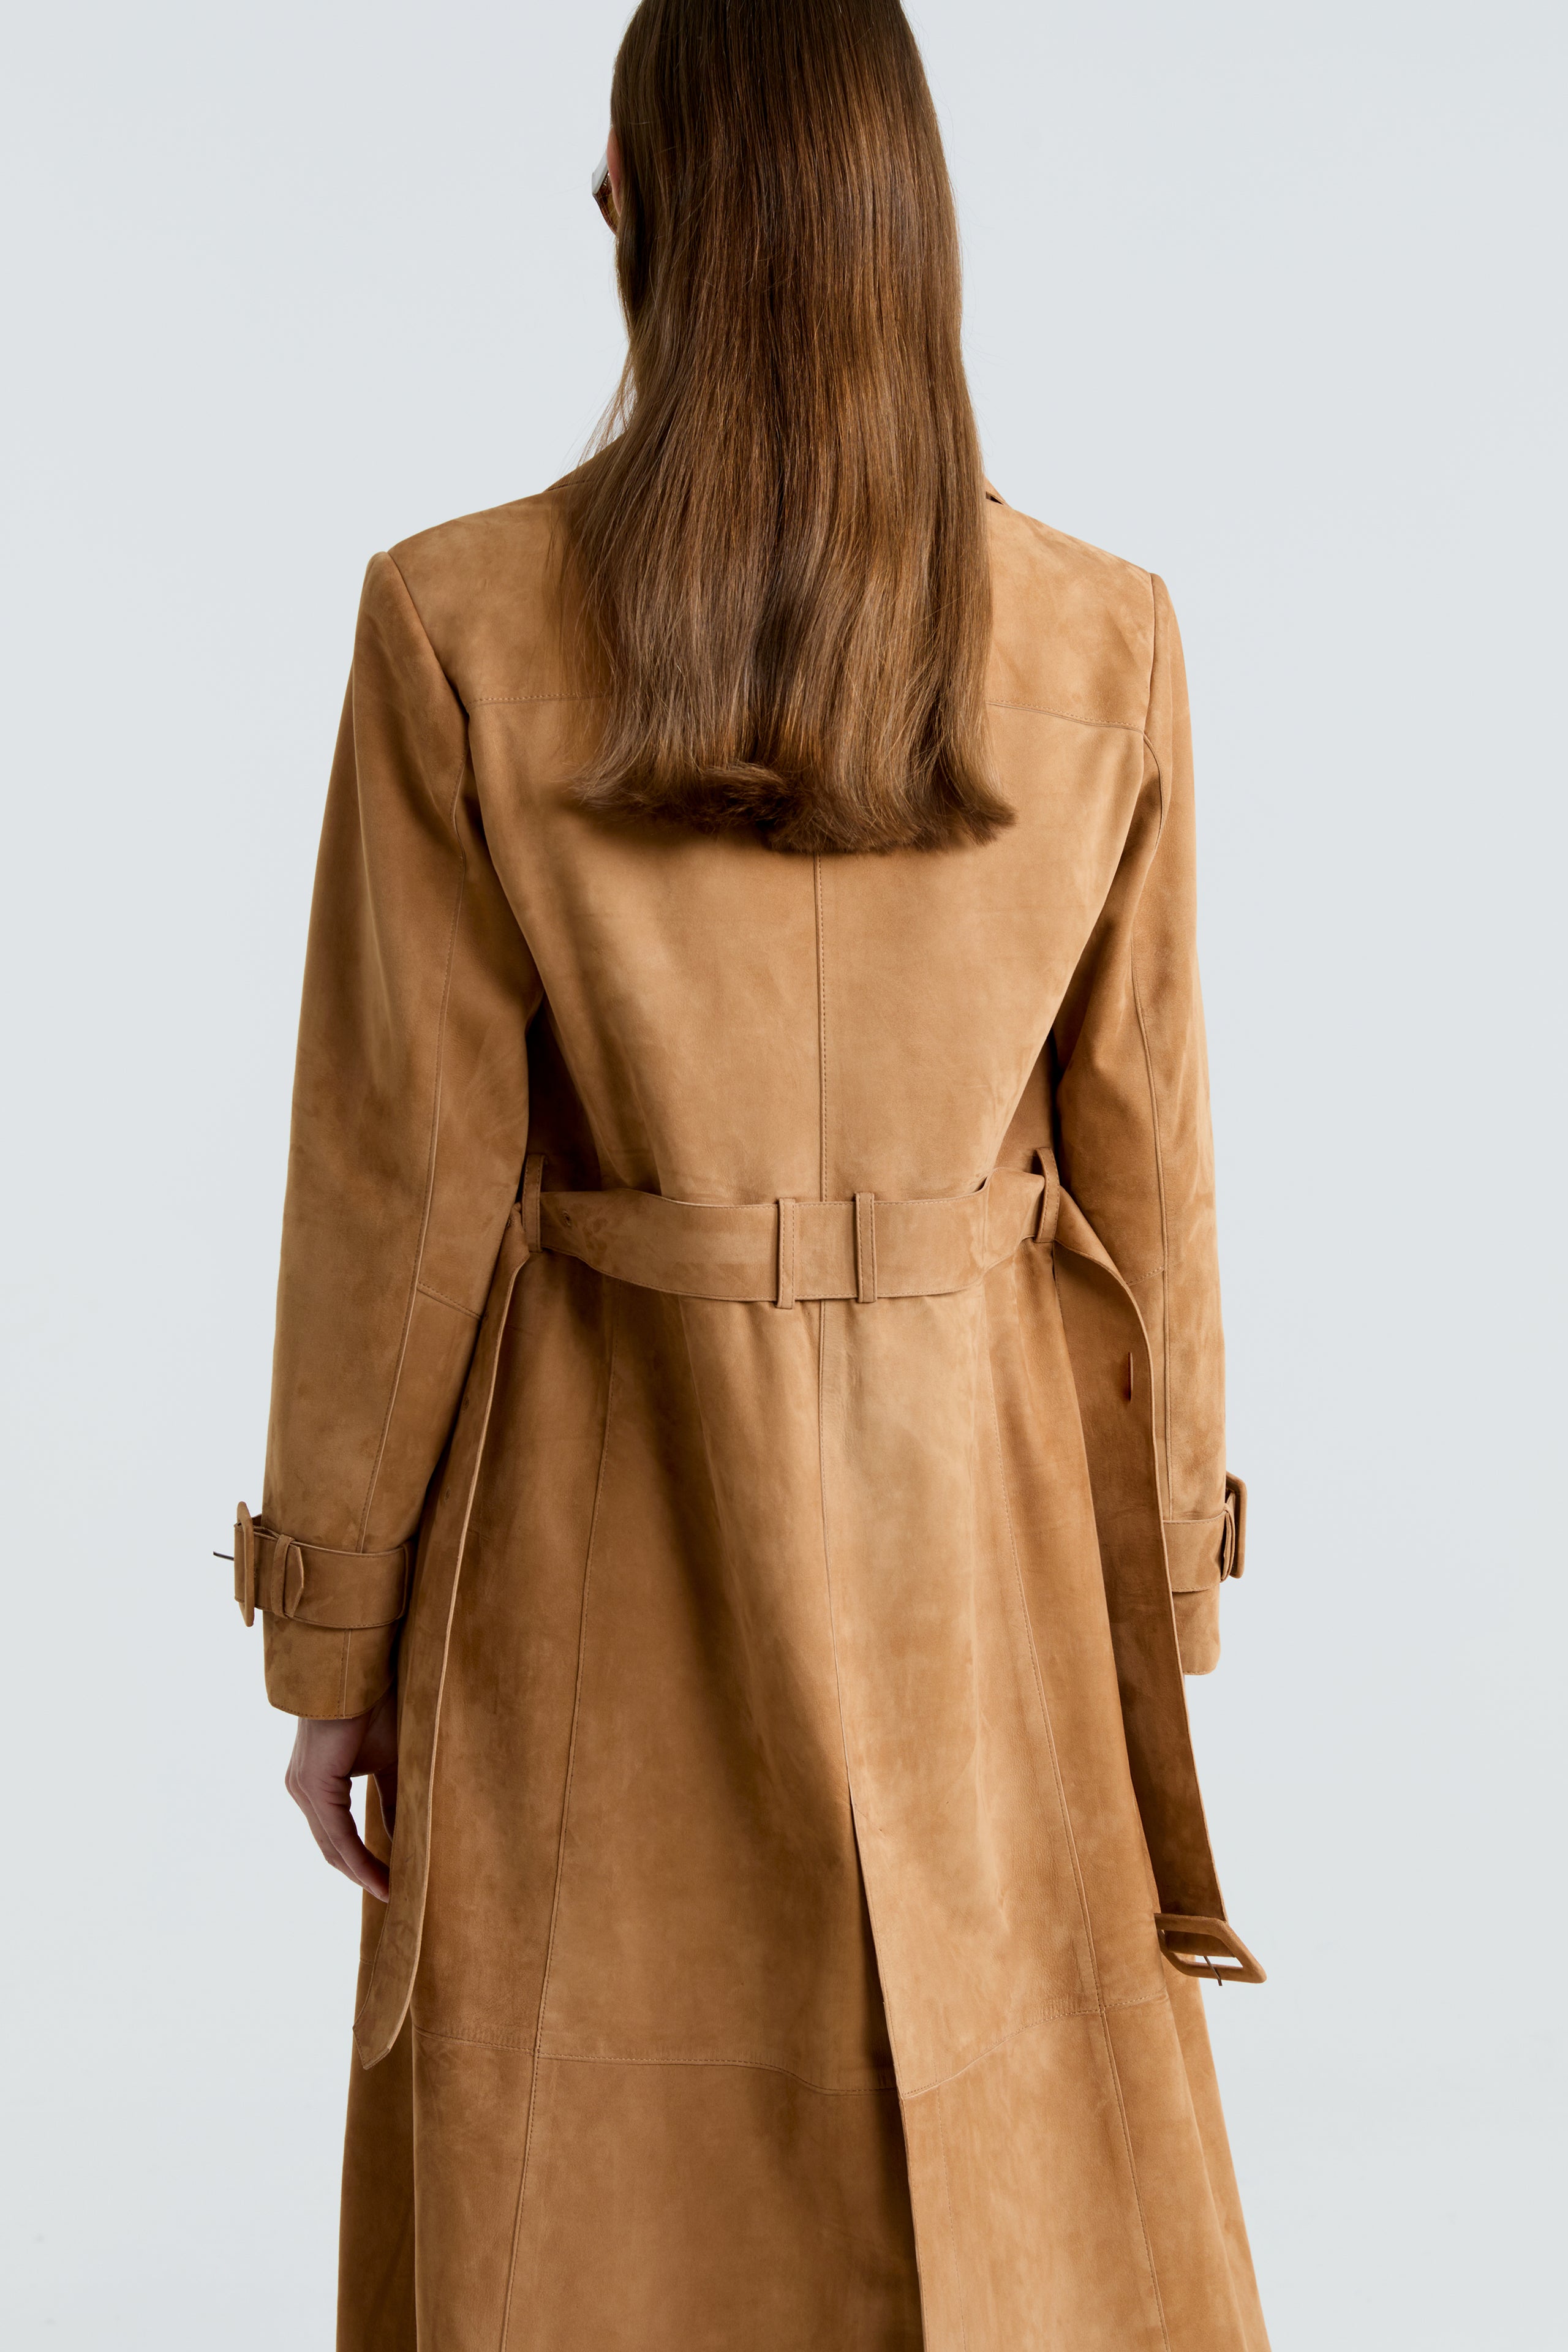 Model is wearing the Tate Beige Everyday Suede Trench Coat Close Up